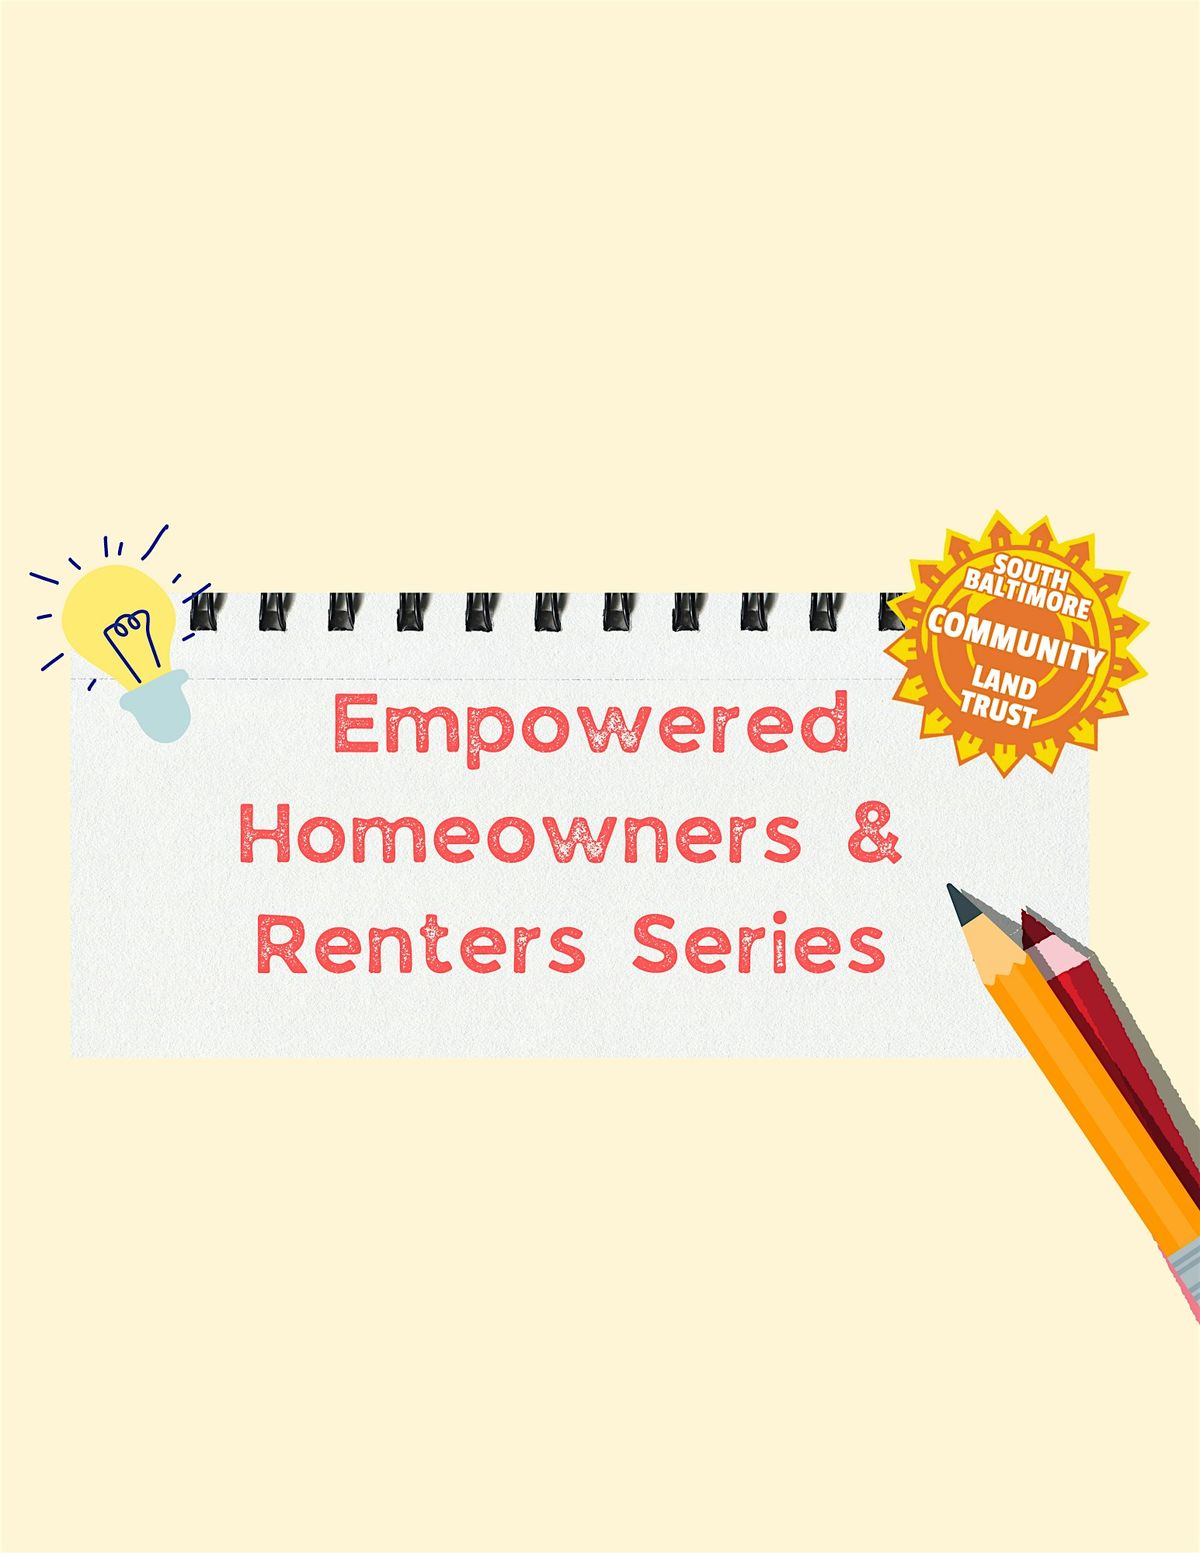 Empowered Homeowners & Renters Series - August